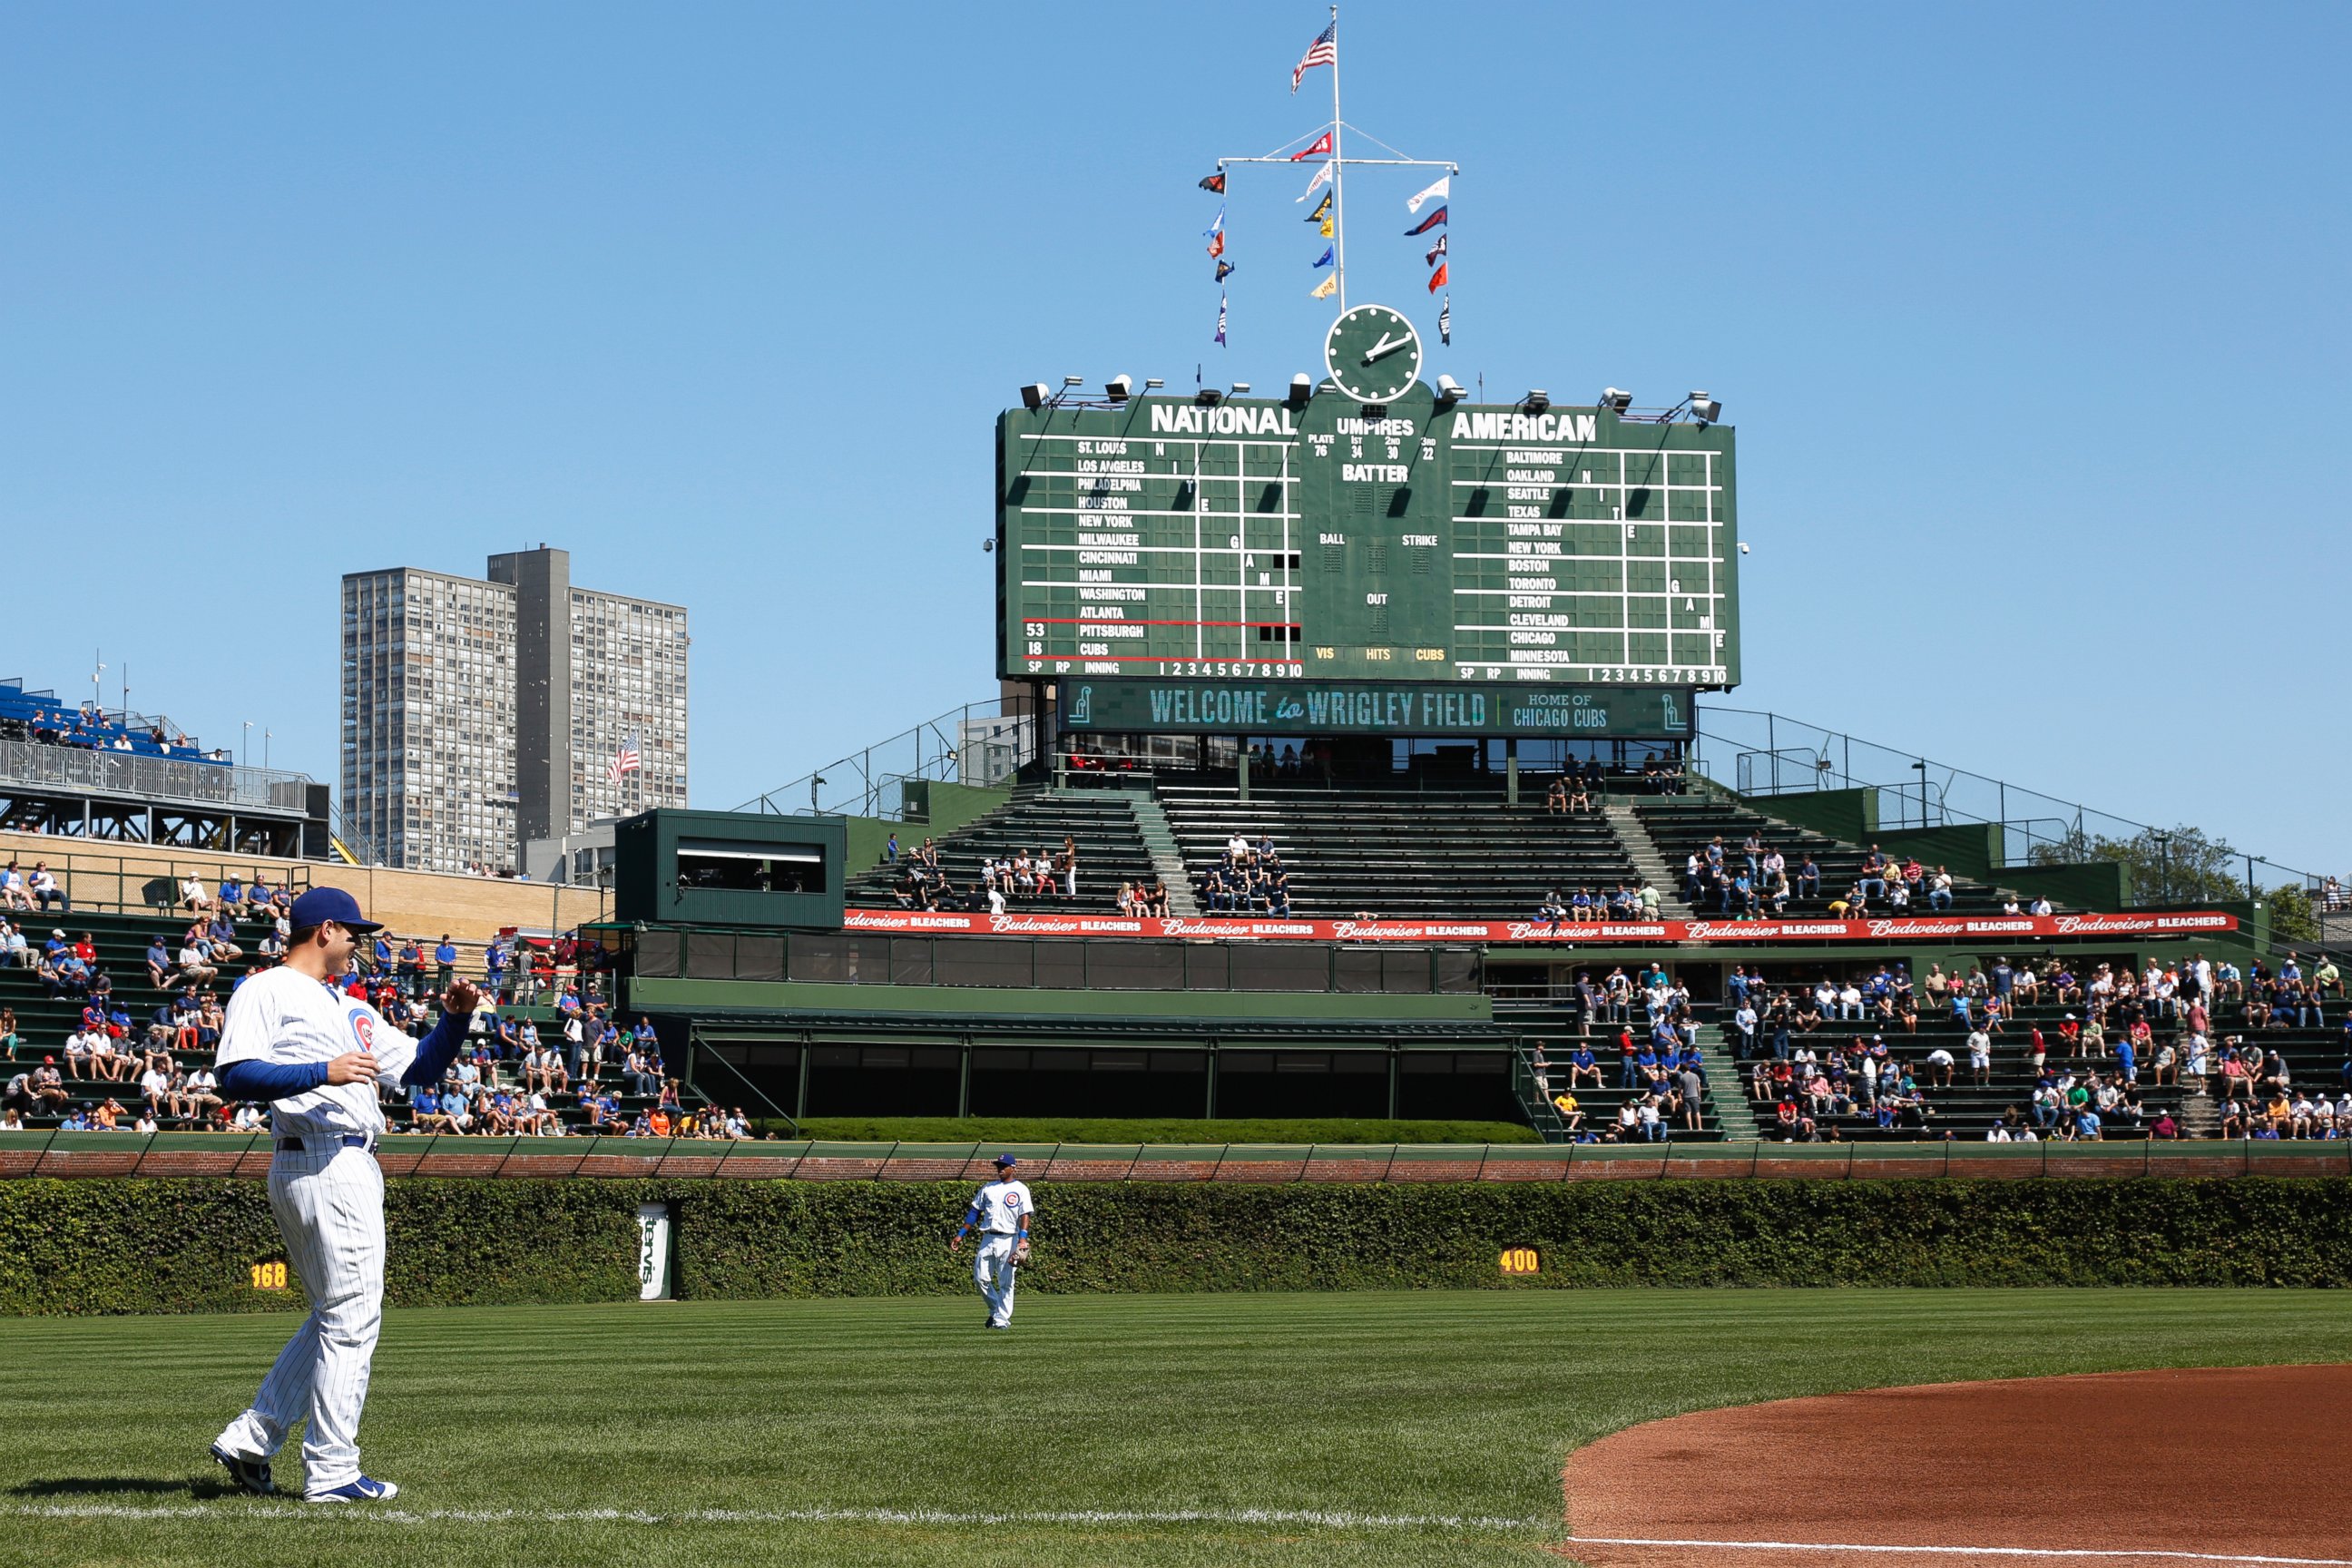 PHOTO: Players warm up before a game at Wrigley Field